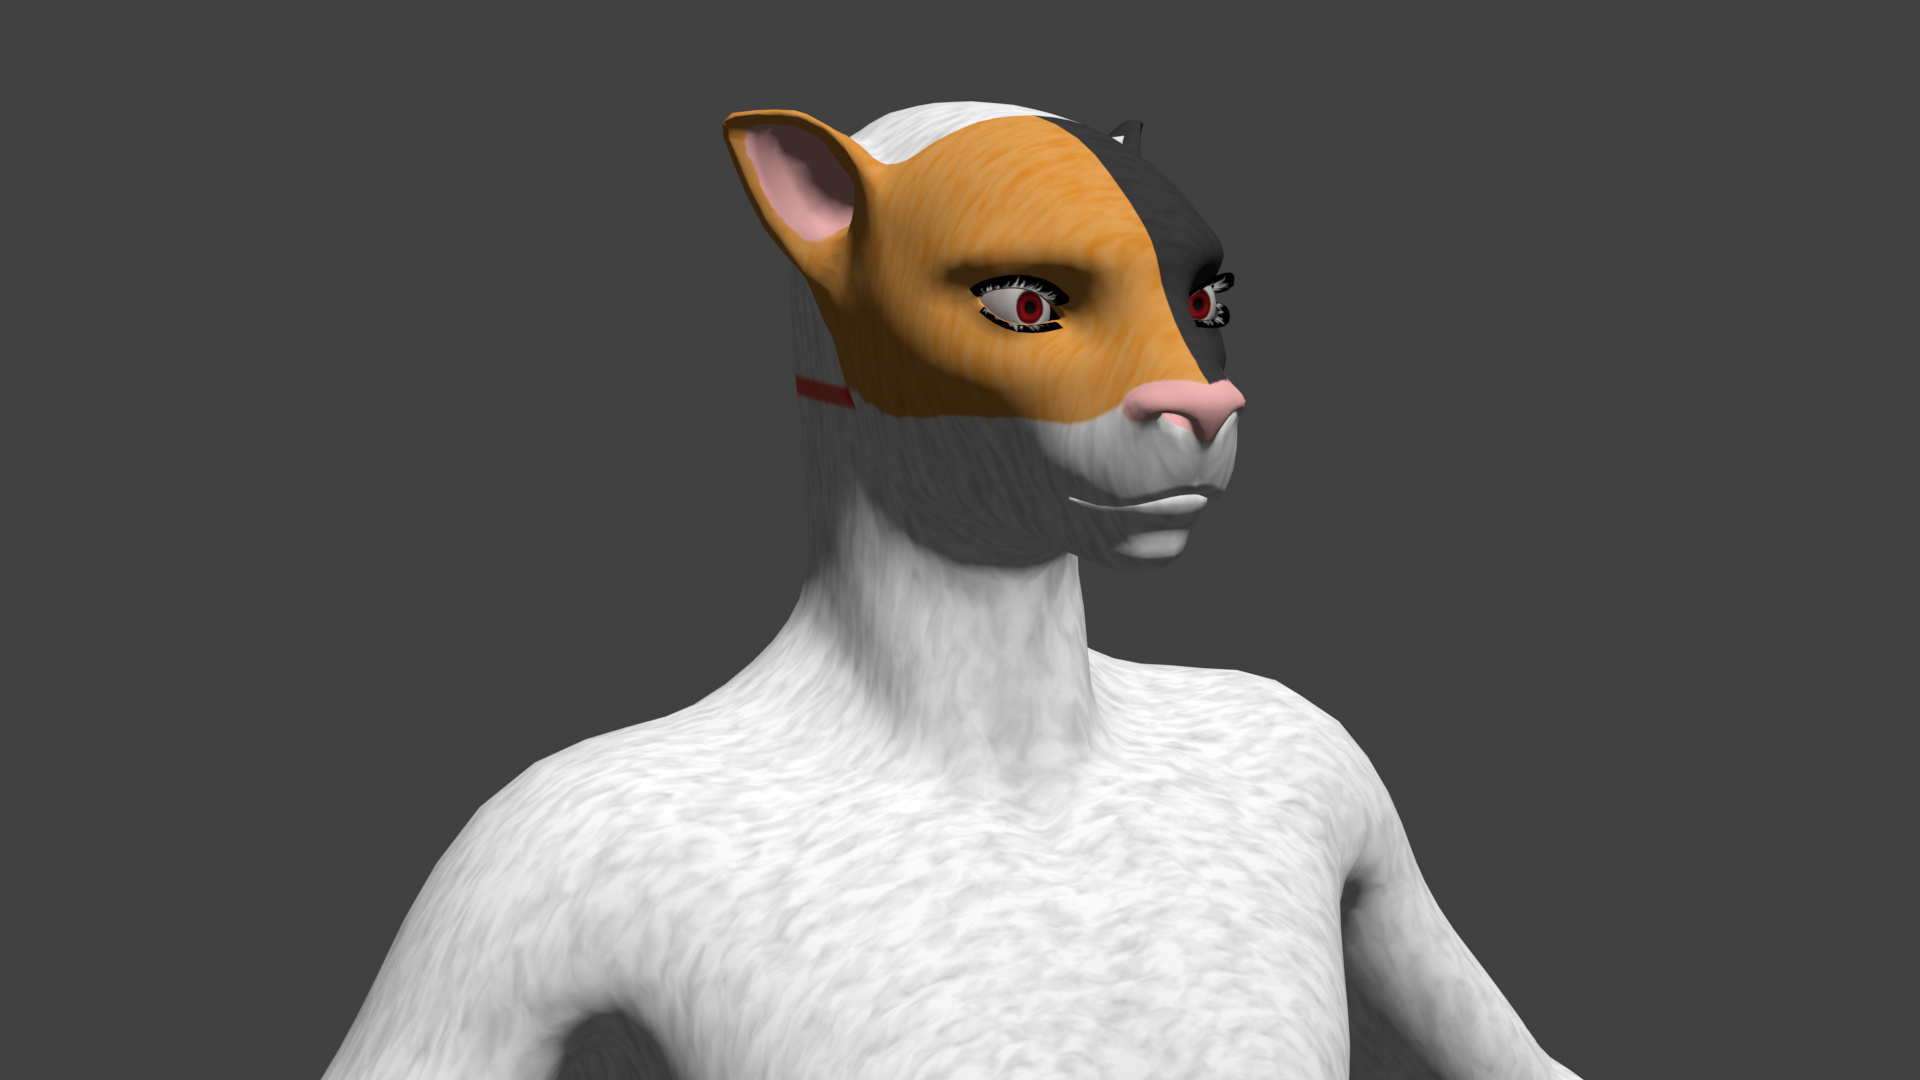 Generating a or fur like material - Materials and - Blender Artists Community